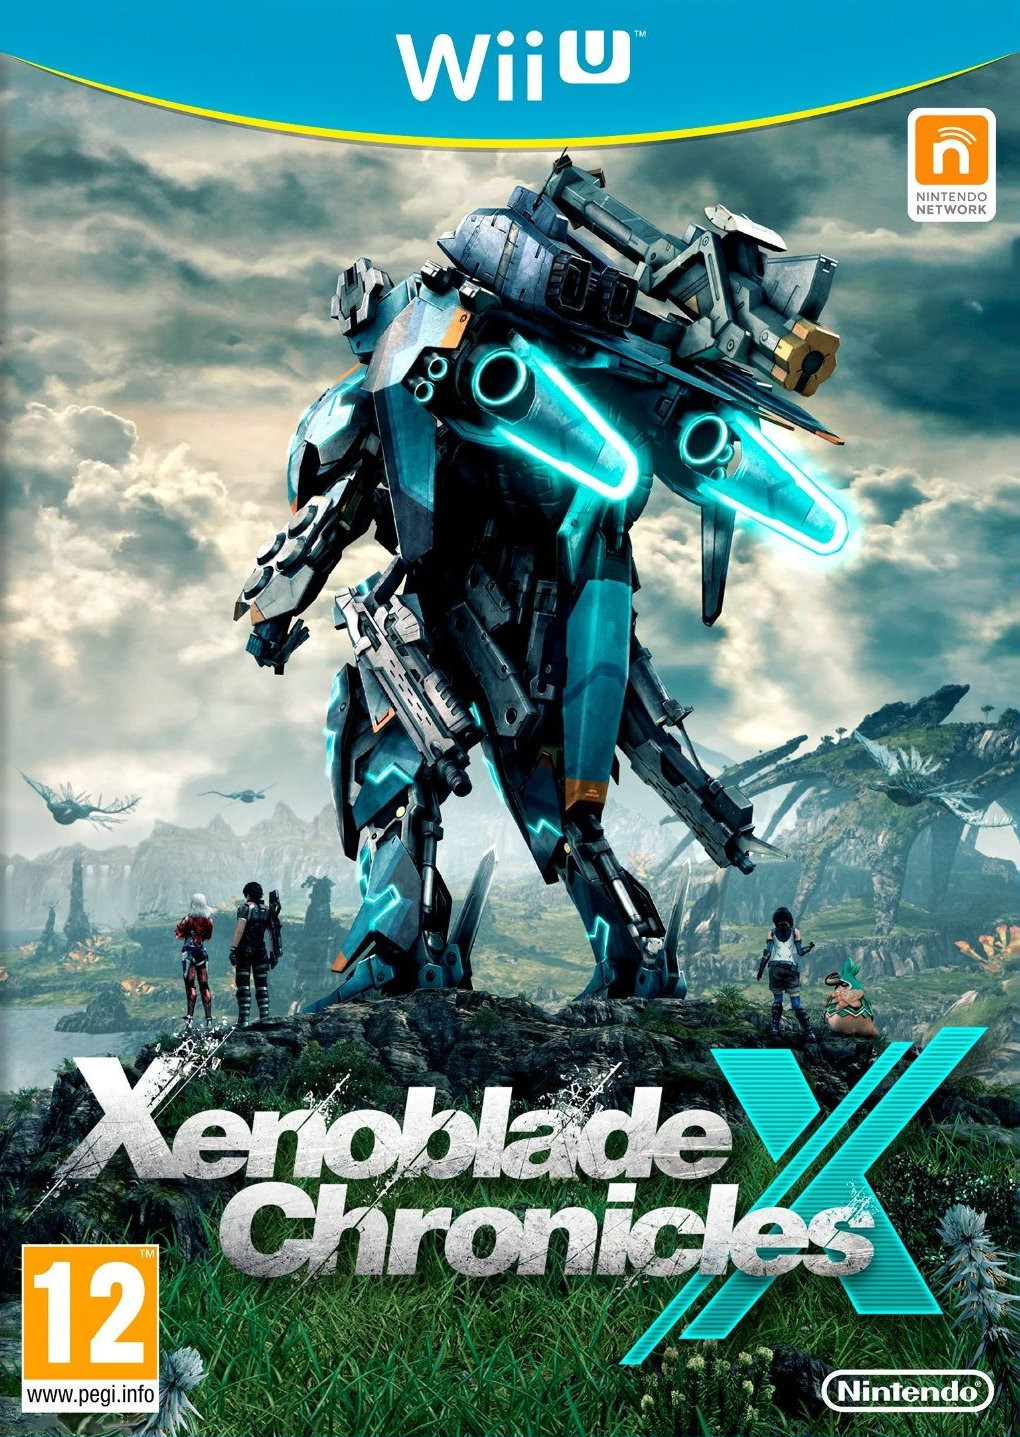 Buy Xenoblade Chronicles X (Wii U) from £26.49 (Today) – Best Deals on